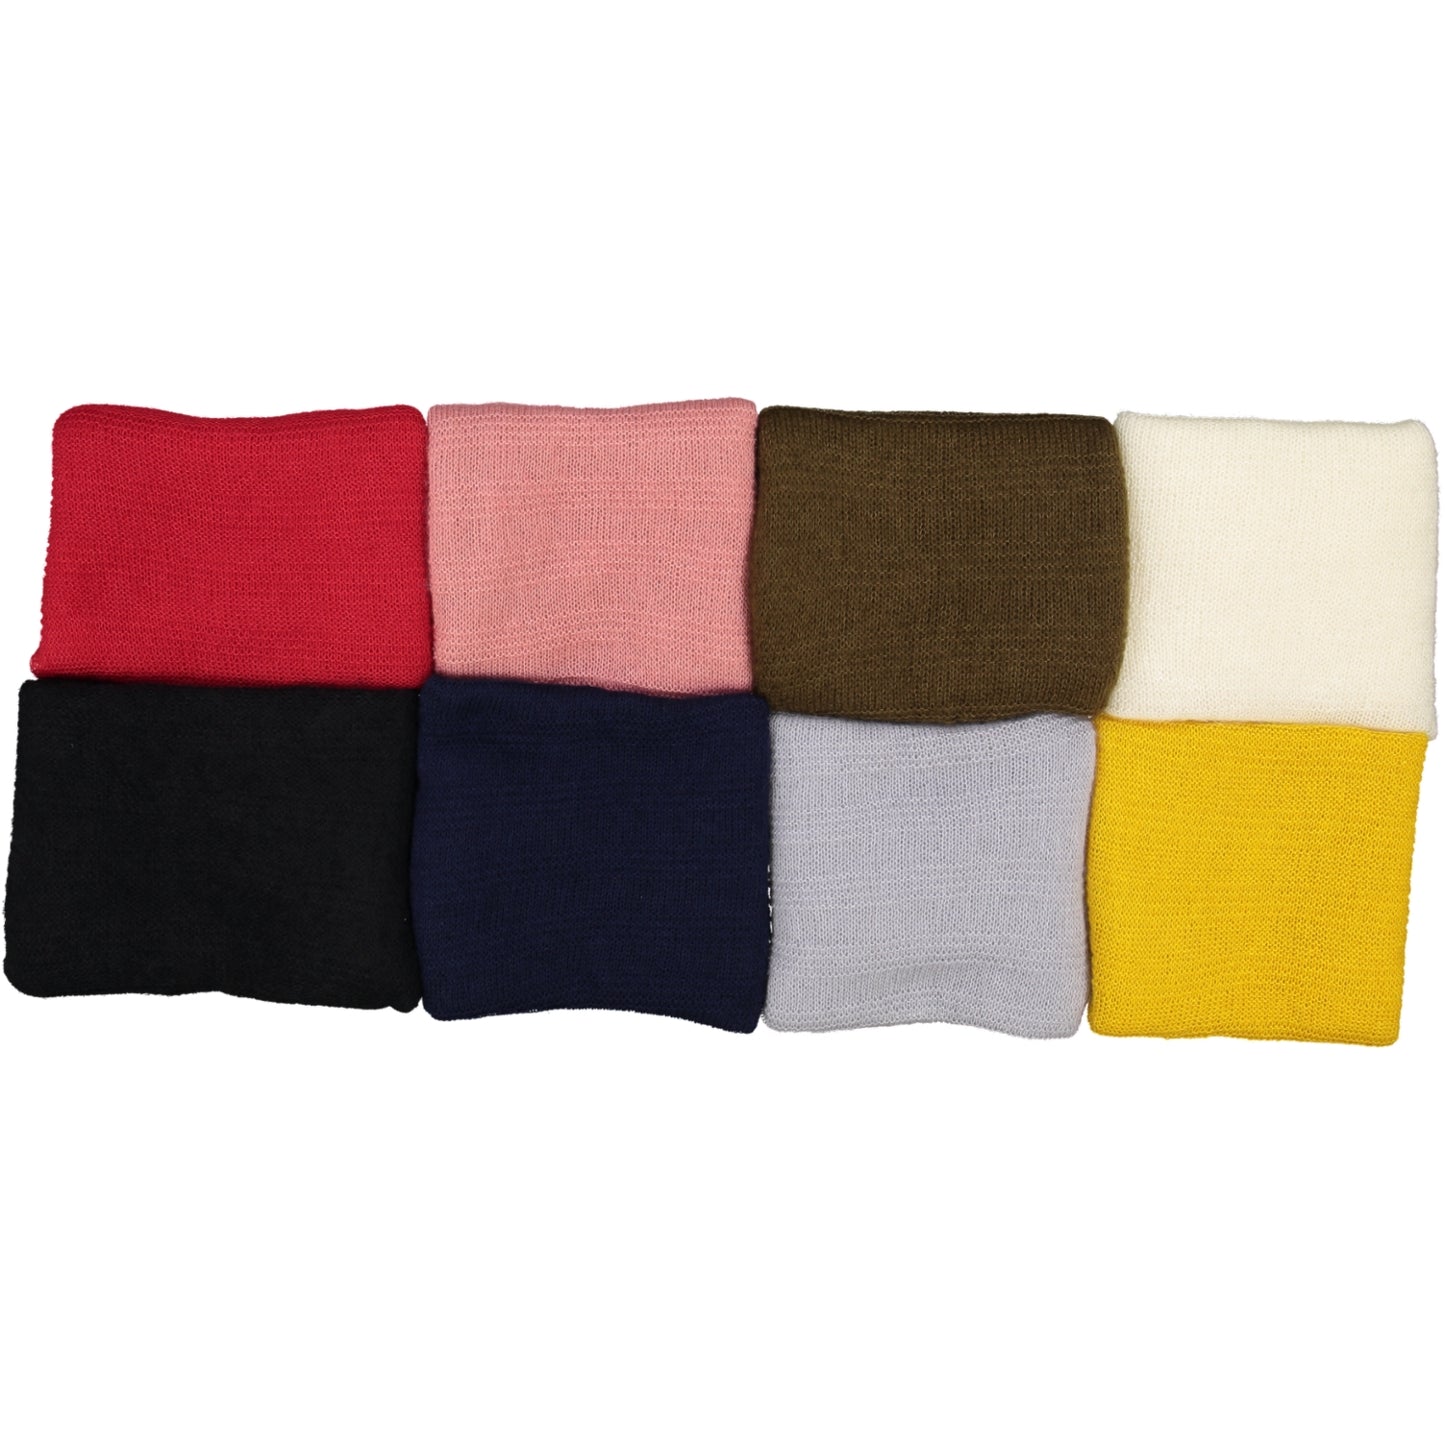 BRUME - a knitted scarf ROSE JAIPUR